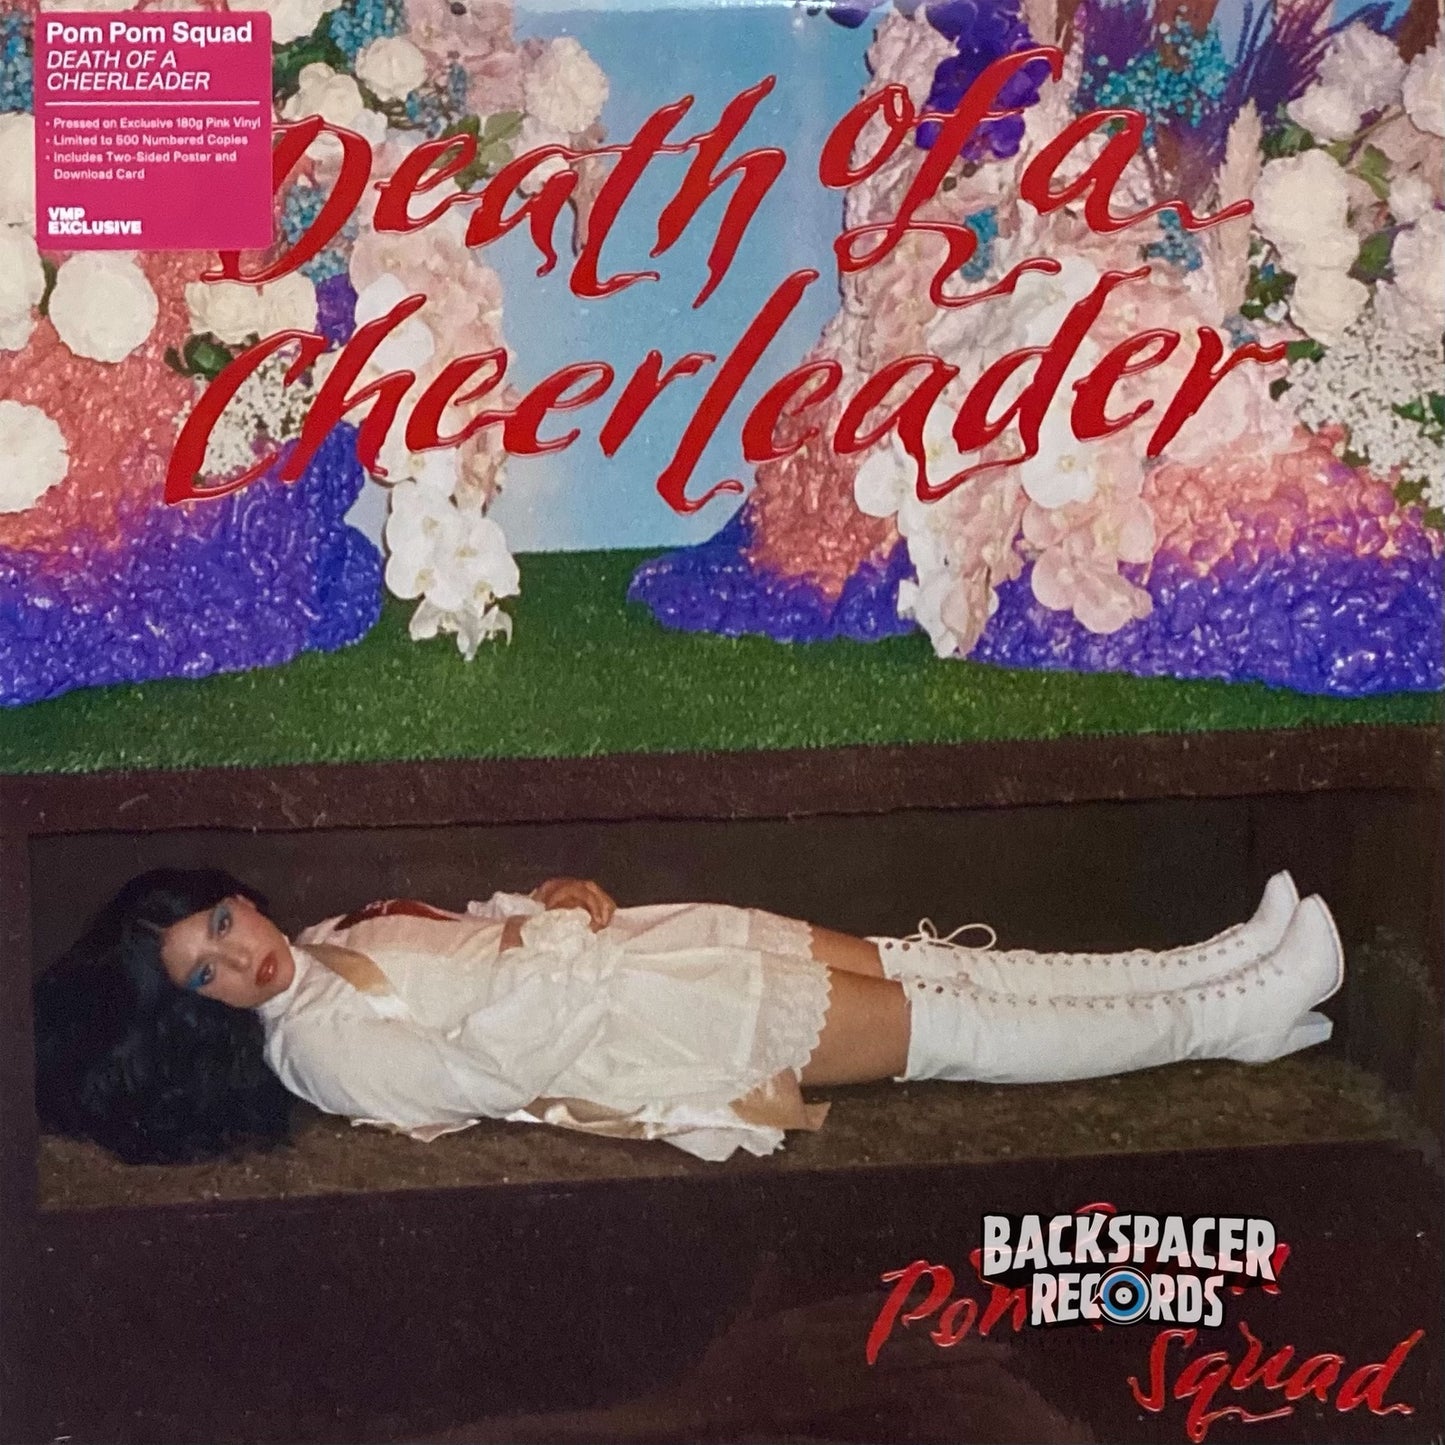 Pom Pom Squad – Death Of A Cheerleader (VMP Exclusive) LP (Sealed)